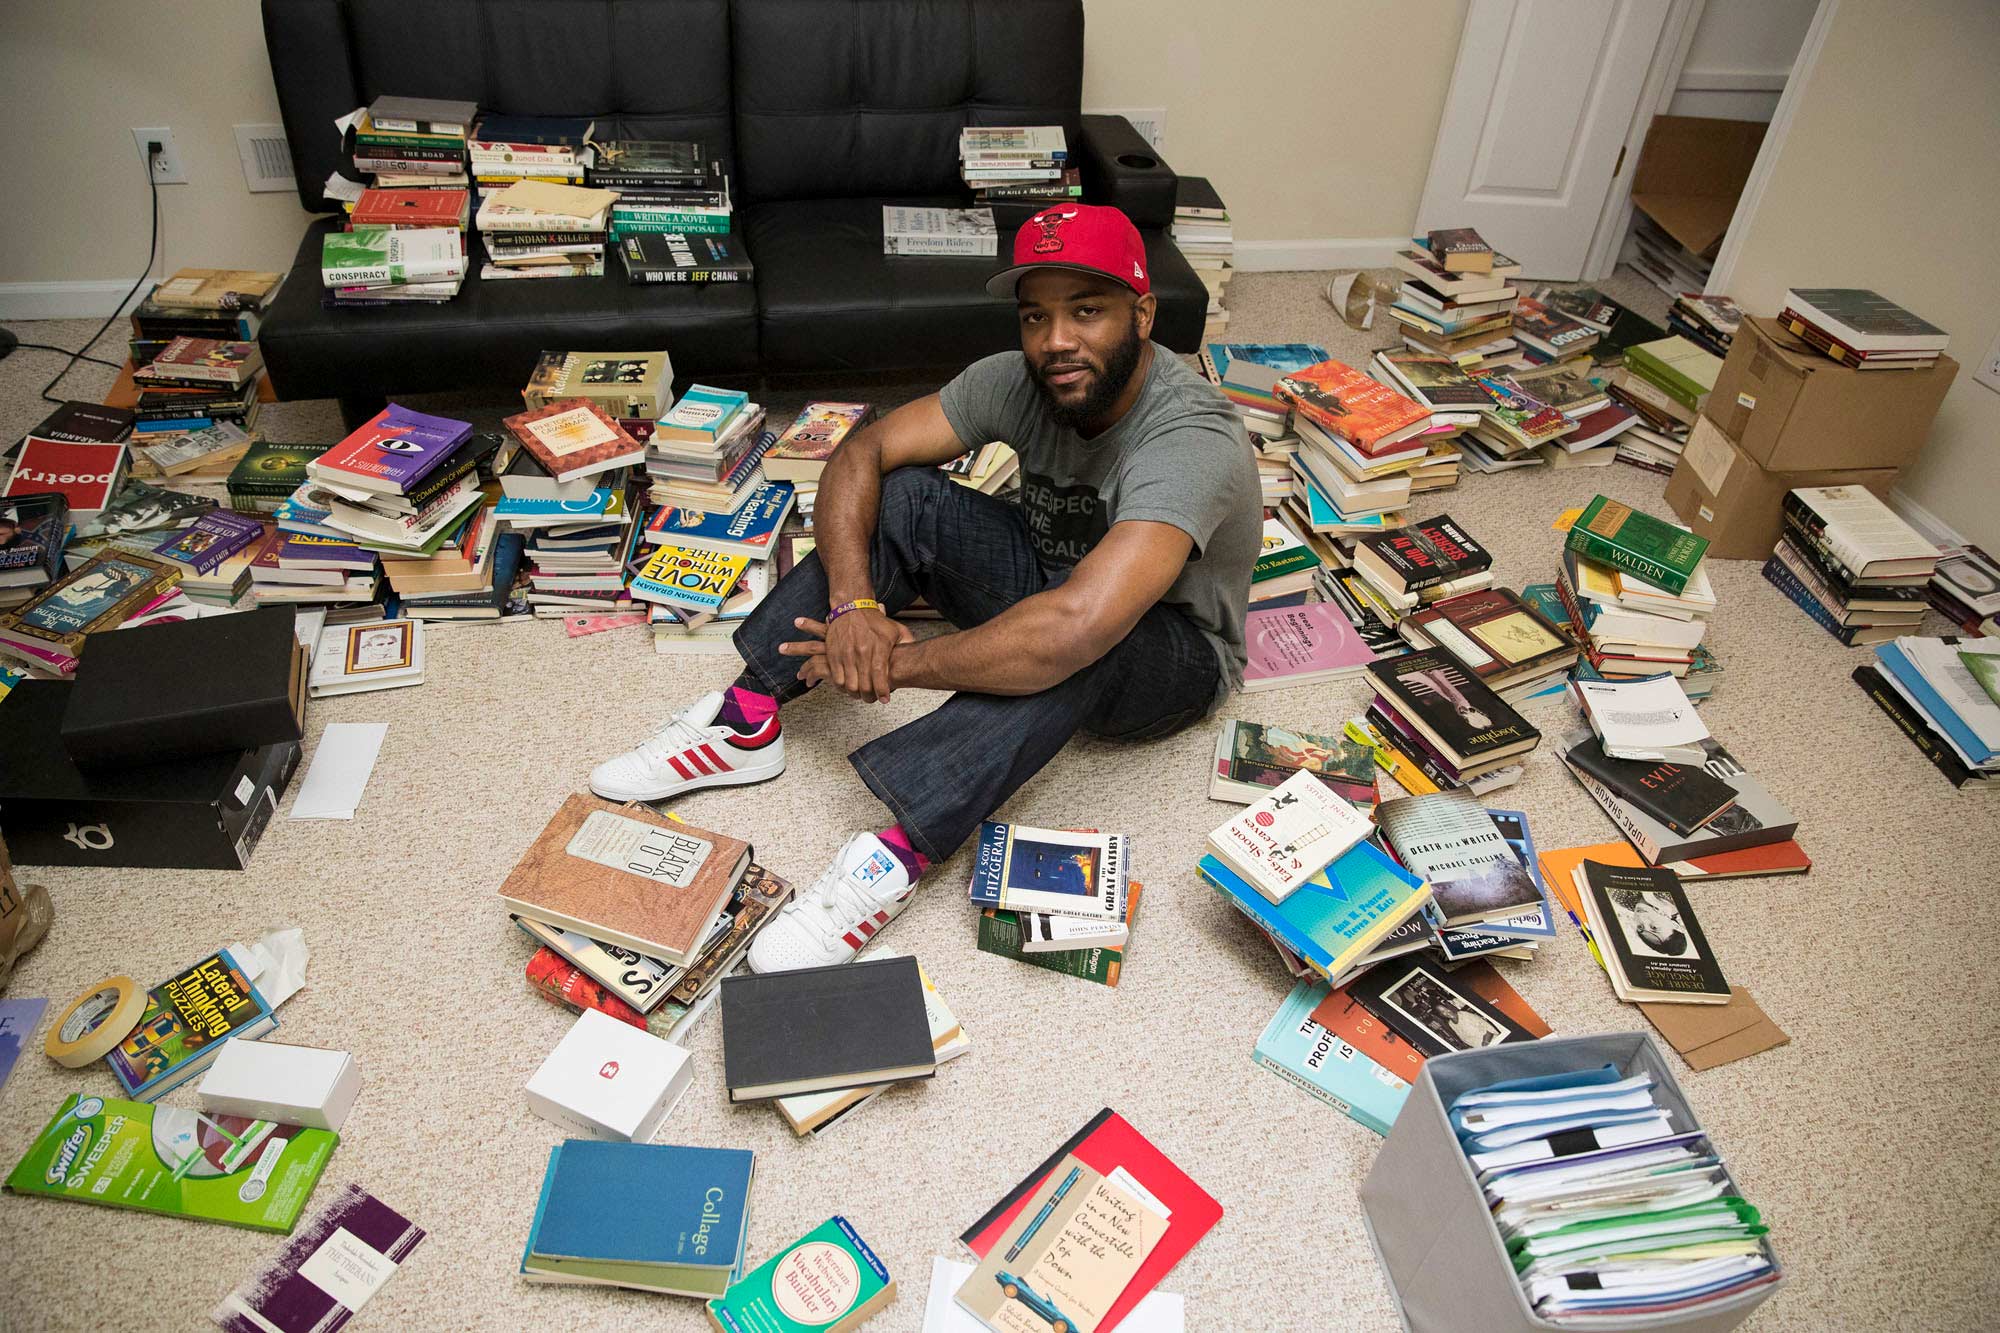 Carson sits on his homes floor surrounded by books